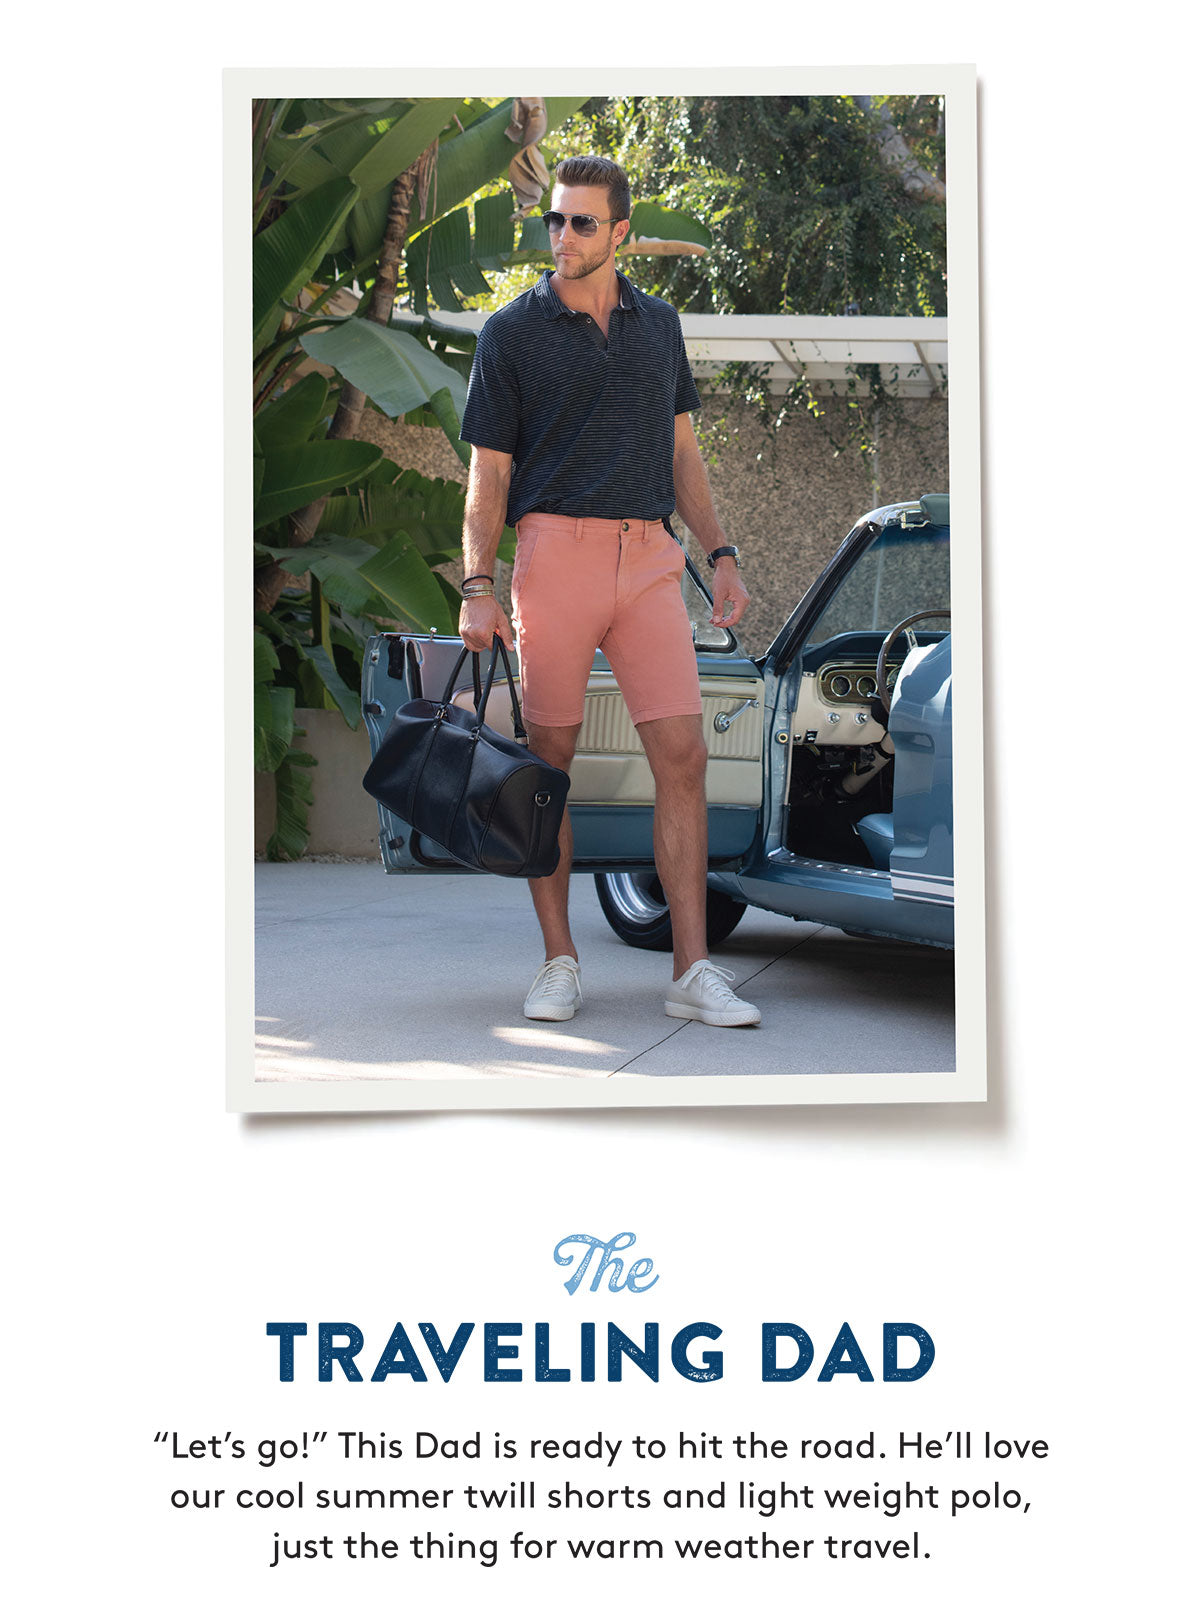 The TRAVELING DAD "Let's go!" This Dad is ready to hit the road. He'll love our cool summer twill shorts and light weight polo, just the thing for warm weather travel.